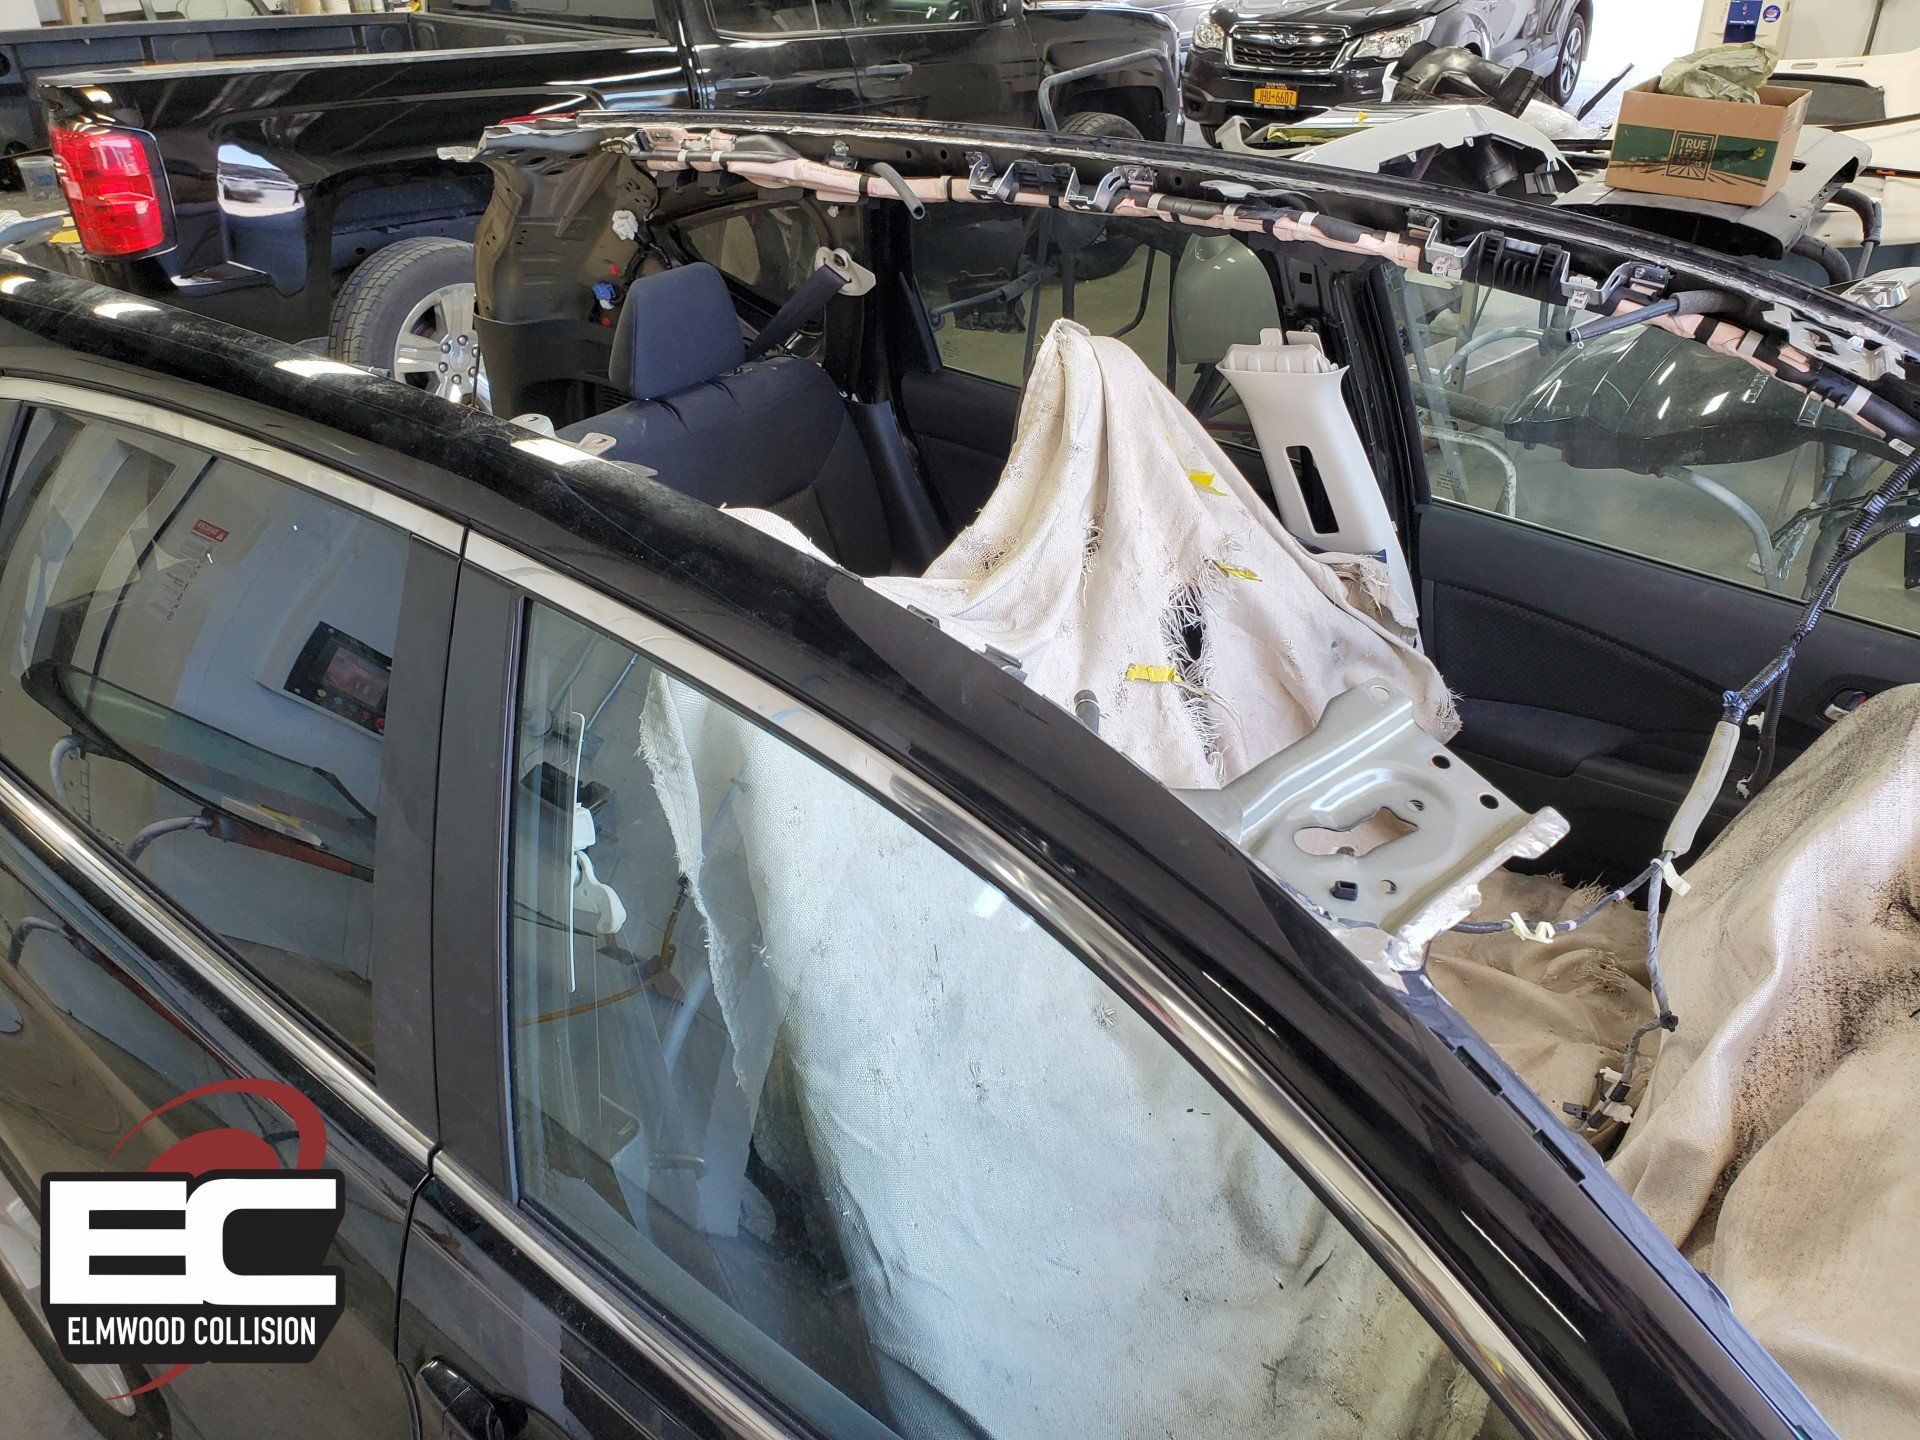 2015 Honda CR-V with roof removed